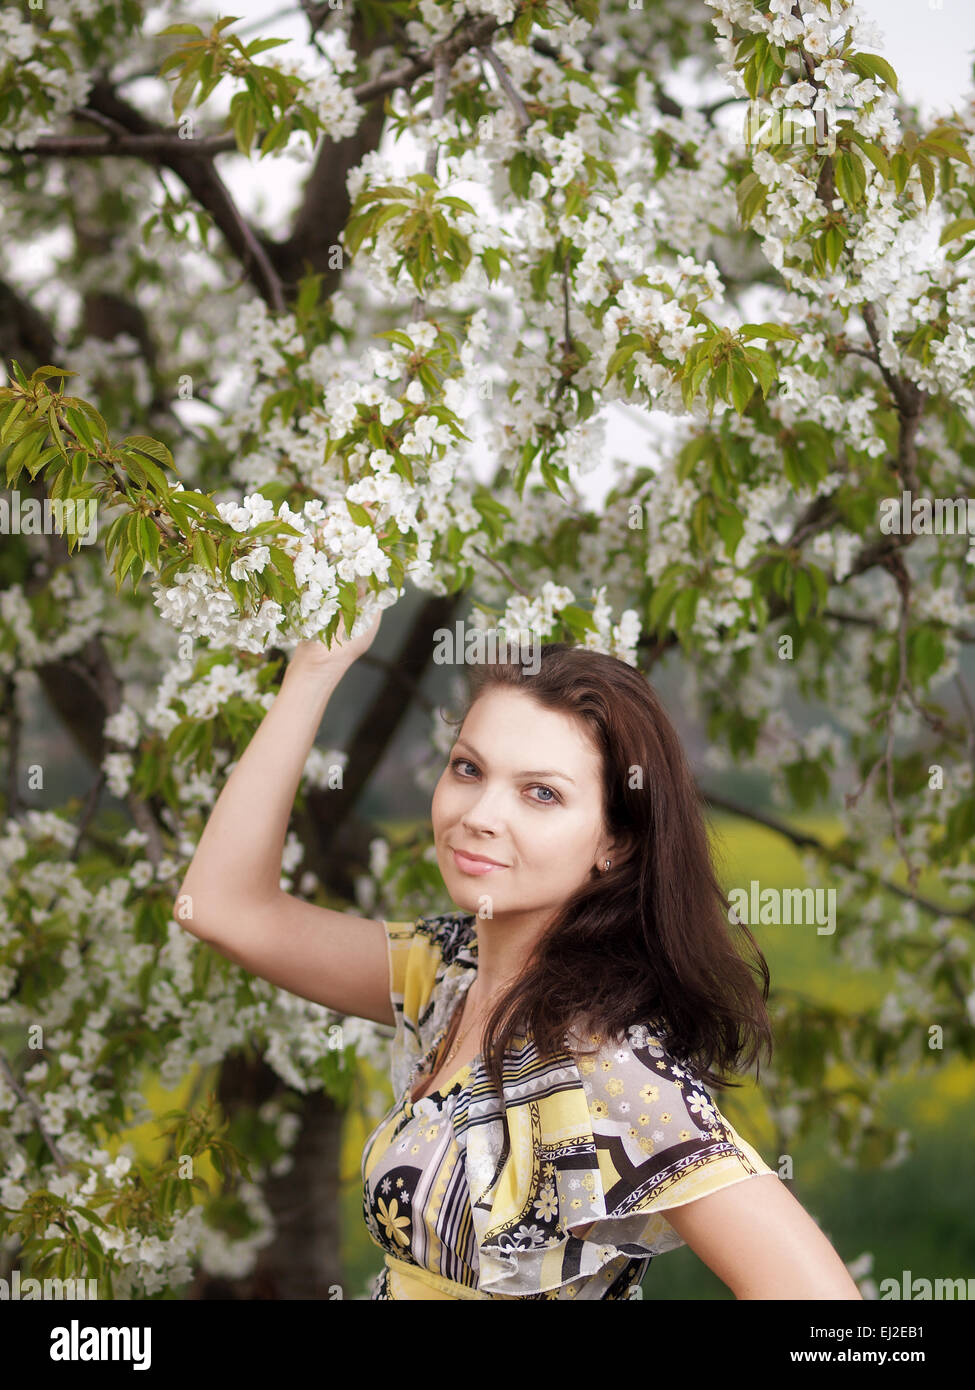 Outdoor young woman during springtime Stock Photo